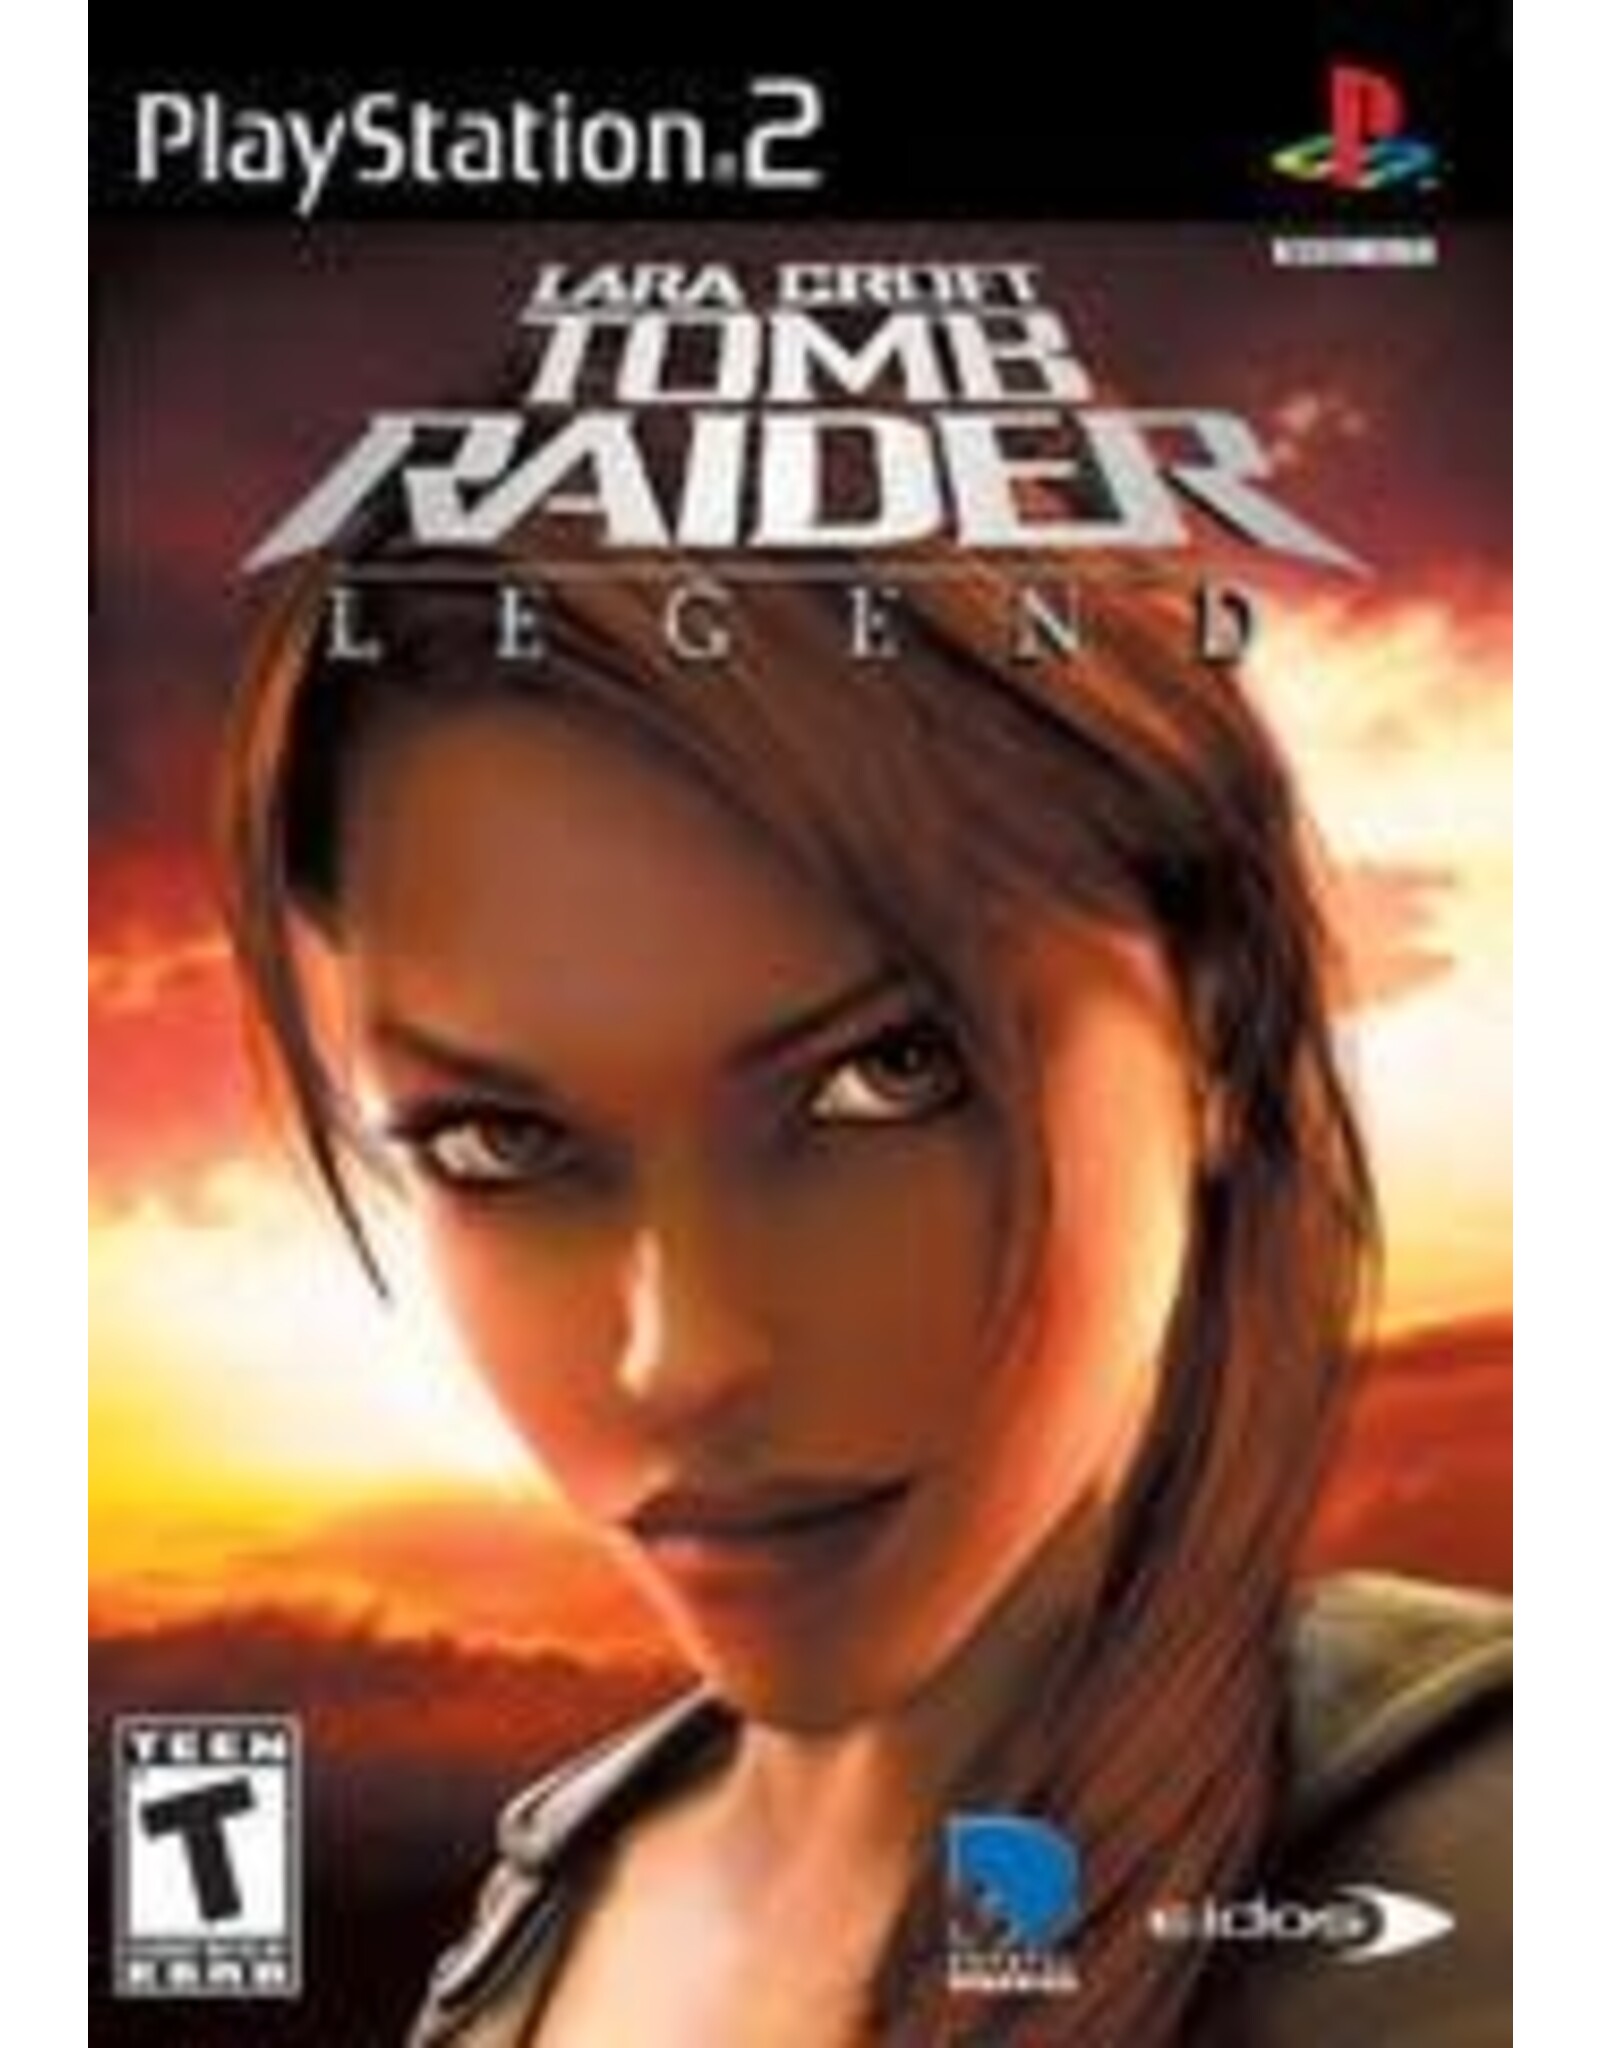 Playstation 2 Tomb Raider Legend (Brand New, Factory Sealed)